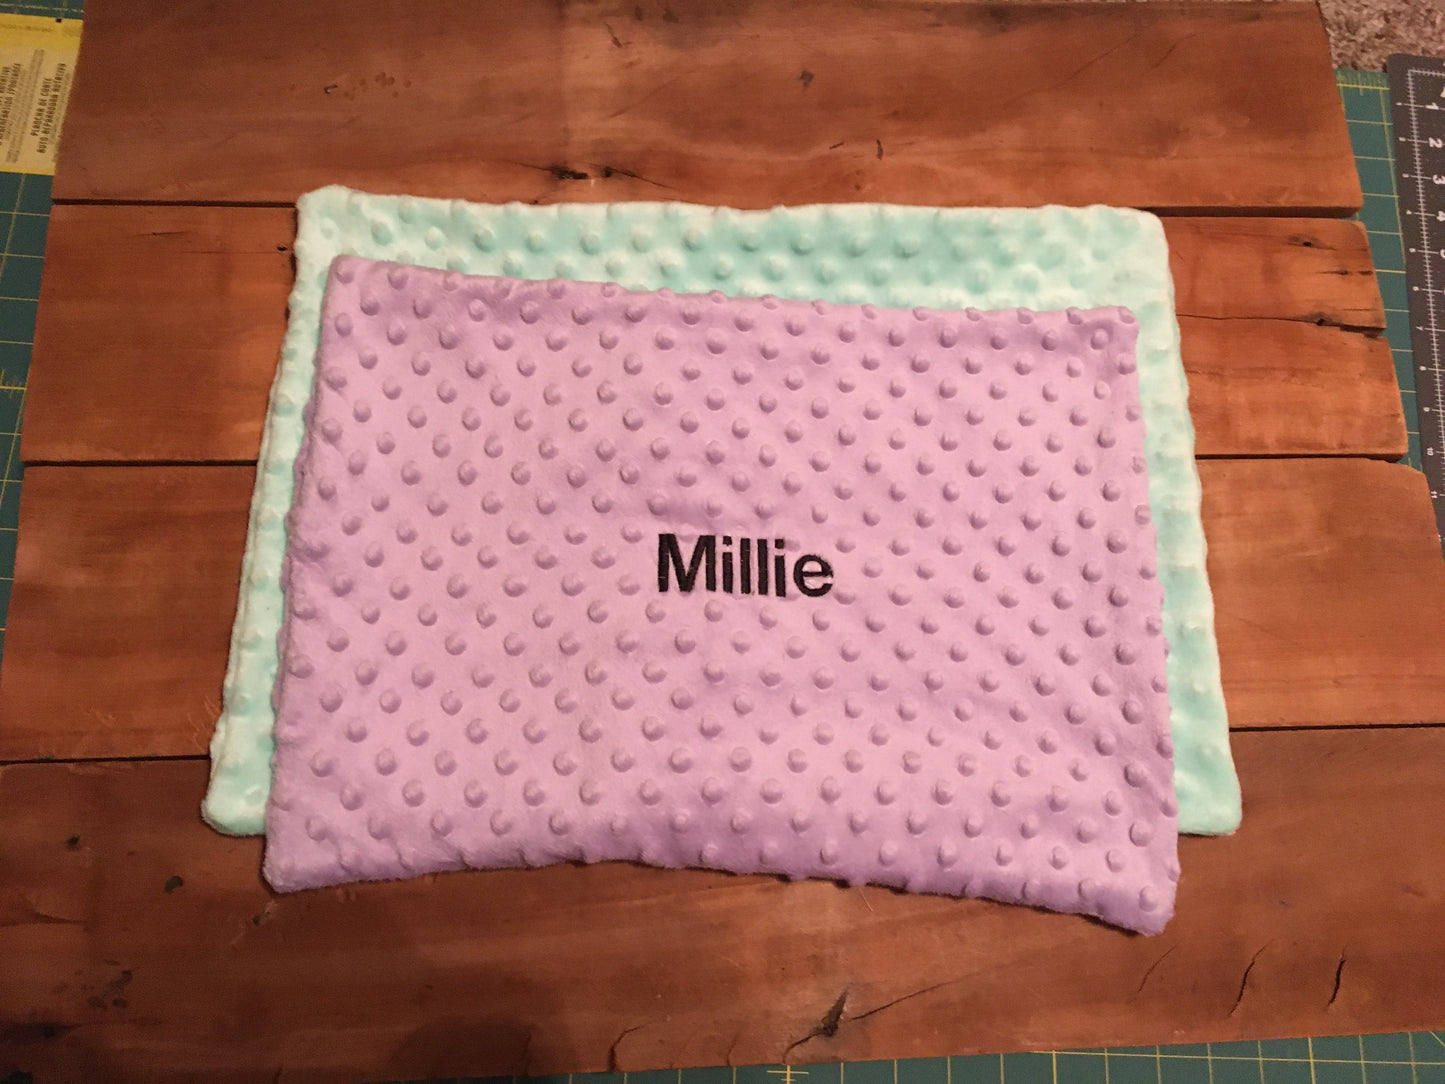 back pillow cover is mint, and top is lavender